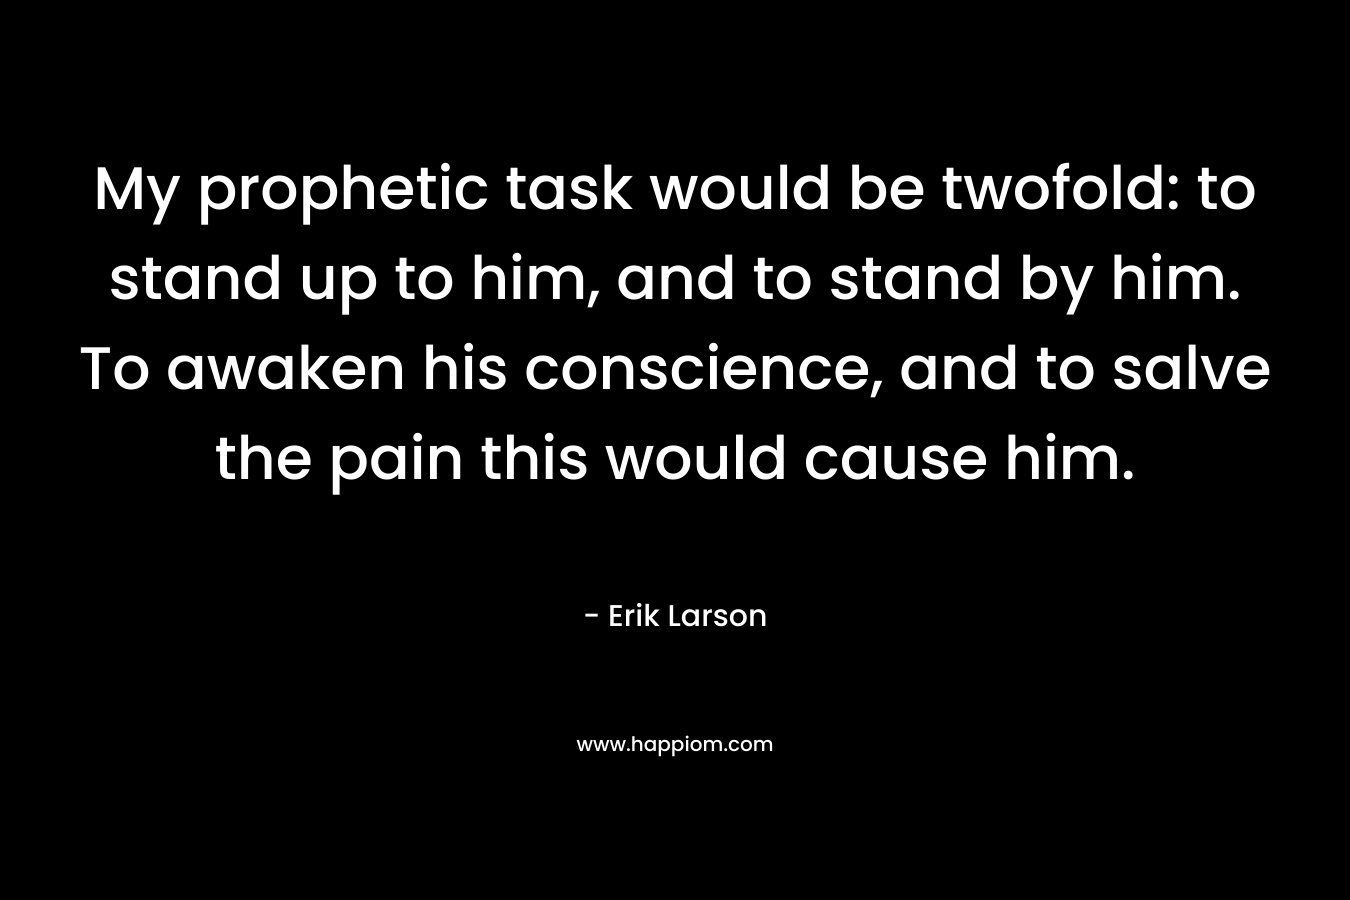 My prophetic task would be twofold: to stand up to him, and to stand by him. To awaken his conscience, and to salve the pain this would cause him. – Erik Larson